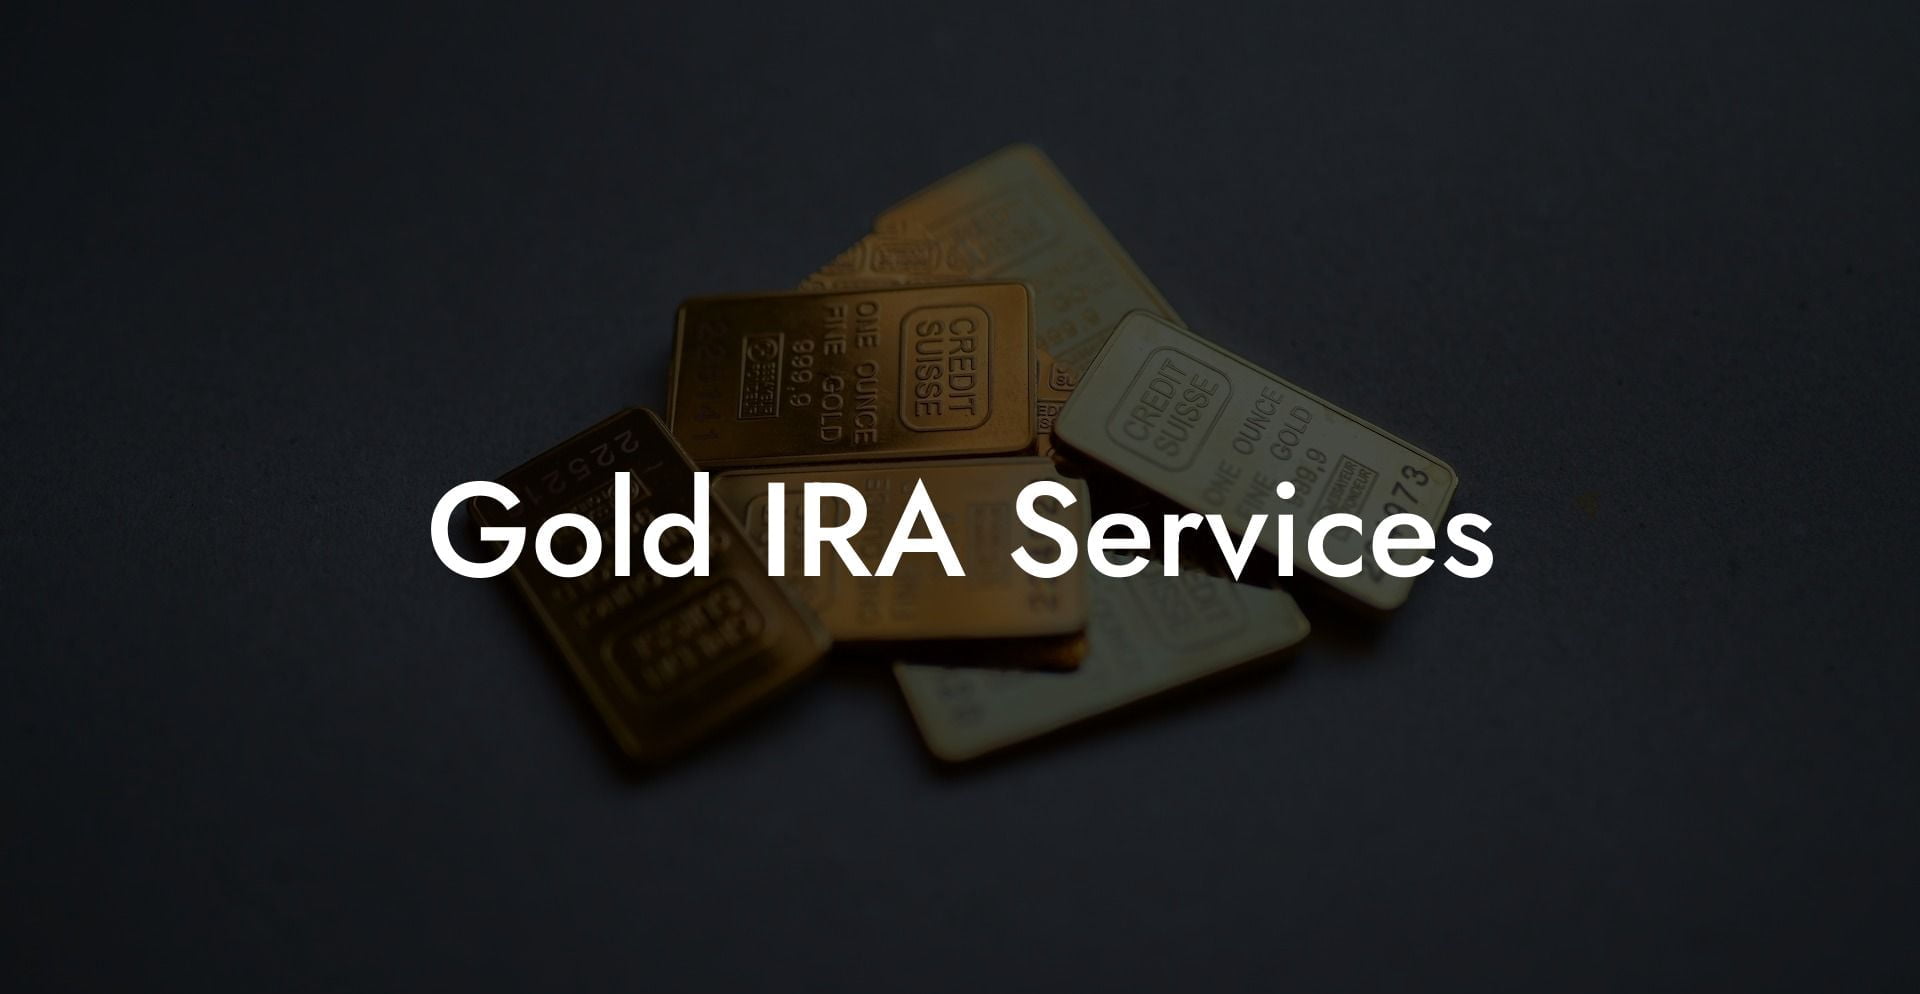 Gold IRA Services